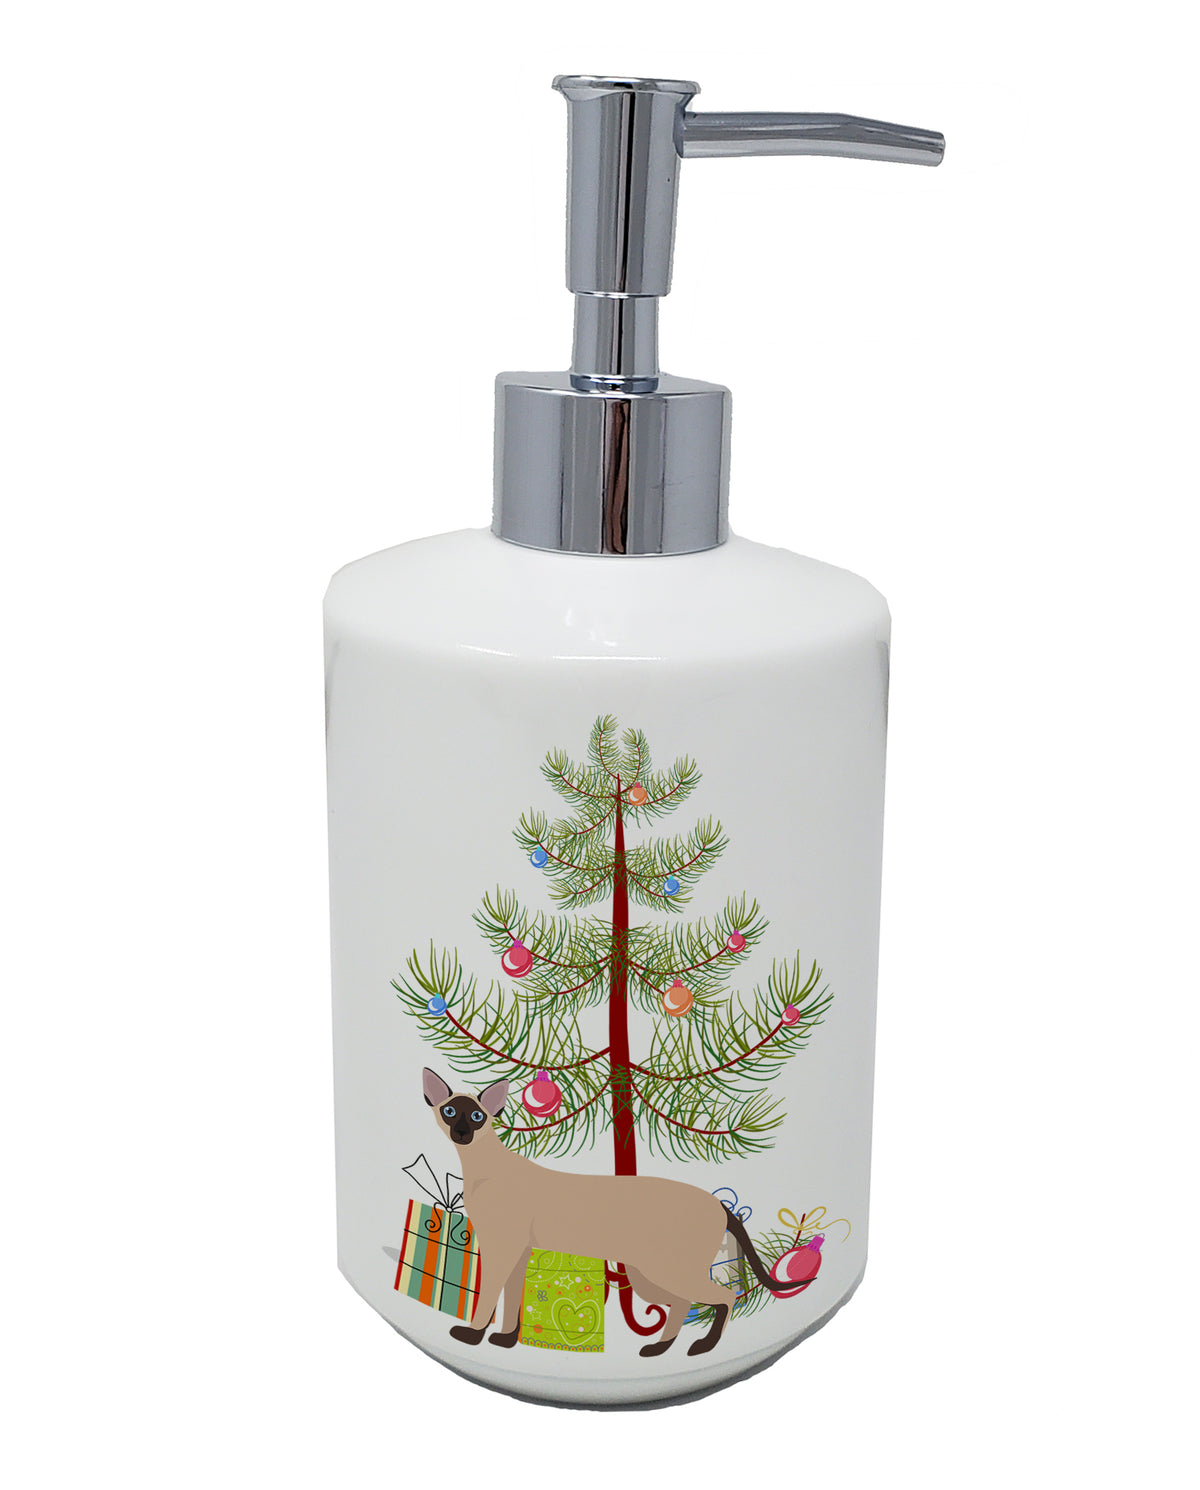 Buy this Colorpoint Shorthair #2 Cat Merry Christmas Ceramic Soap Dispenser